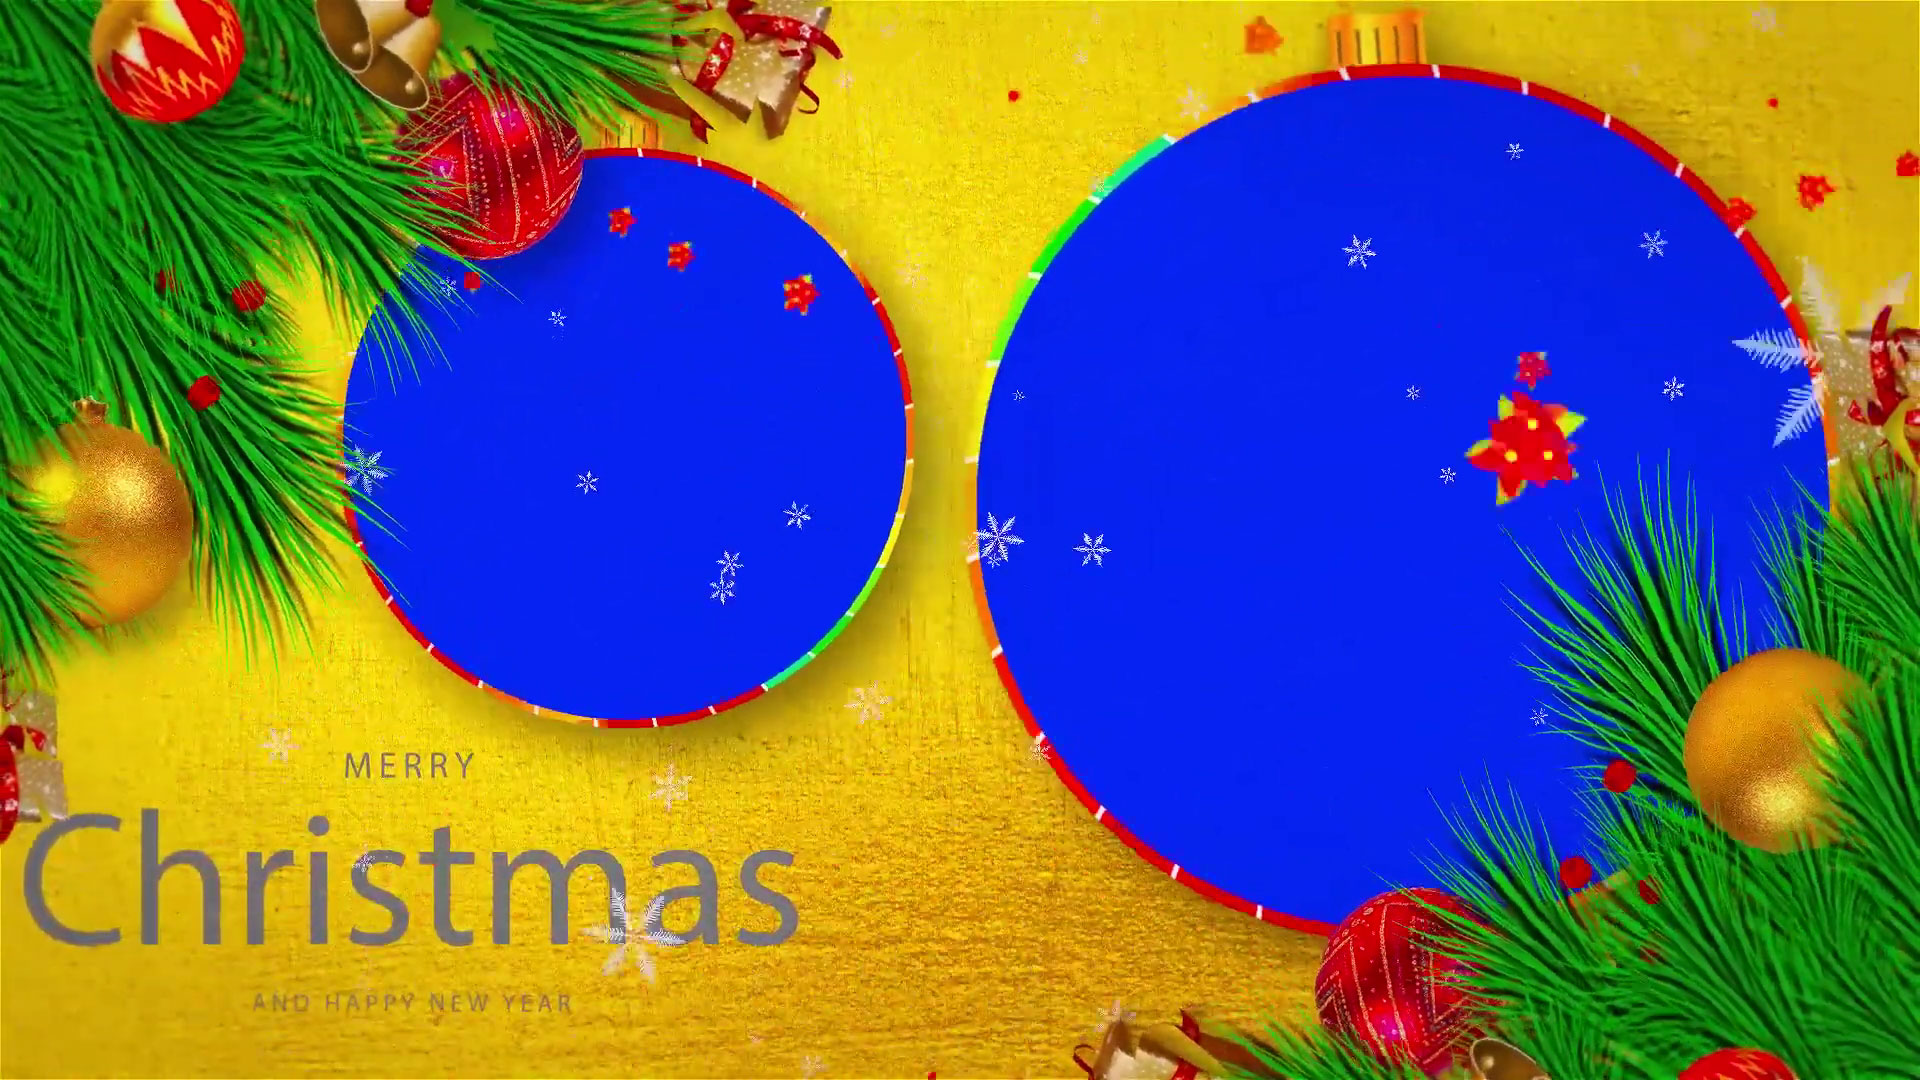 Merry Christmas and Happy New Year Animation Video Template - All Design  Creative